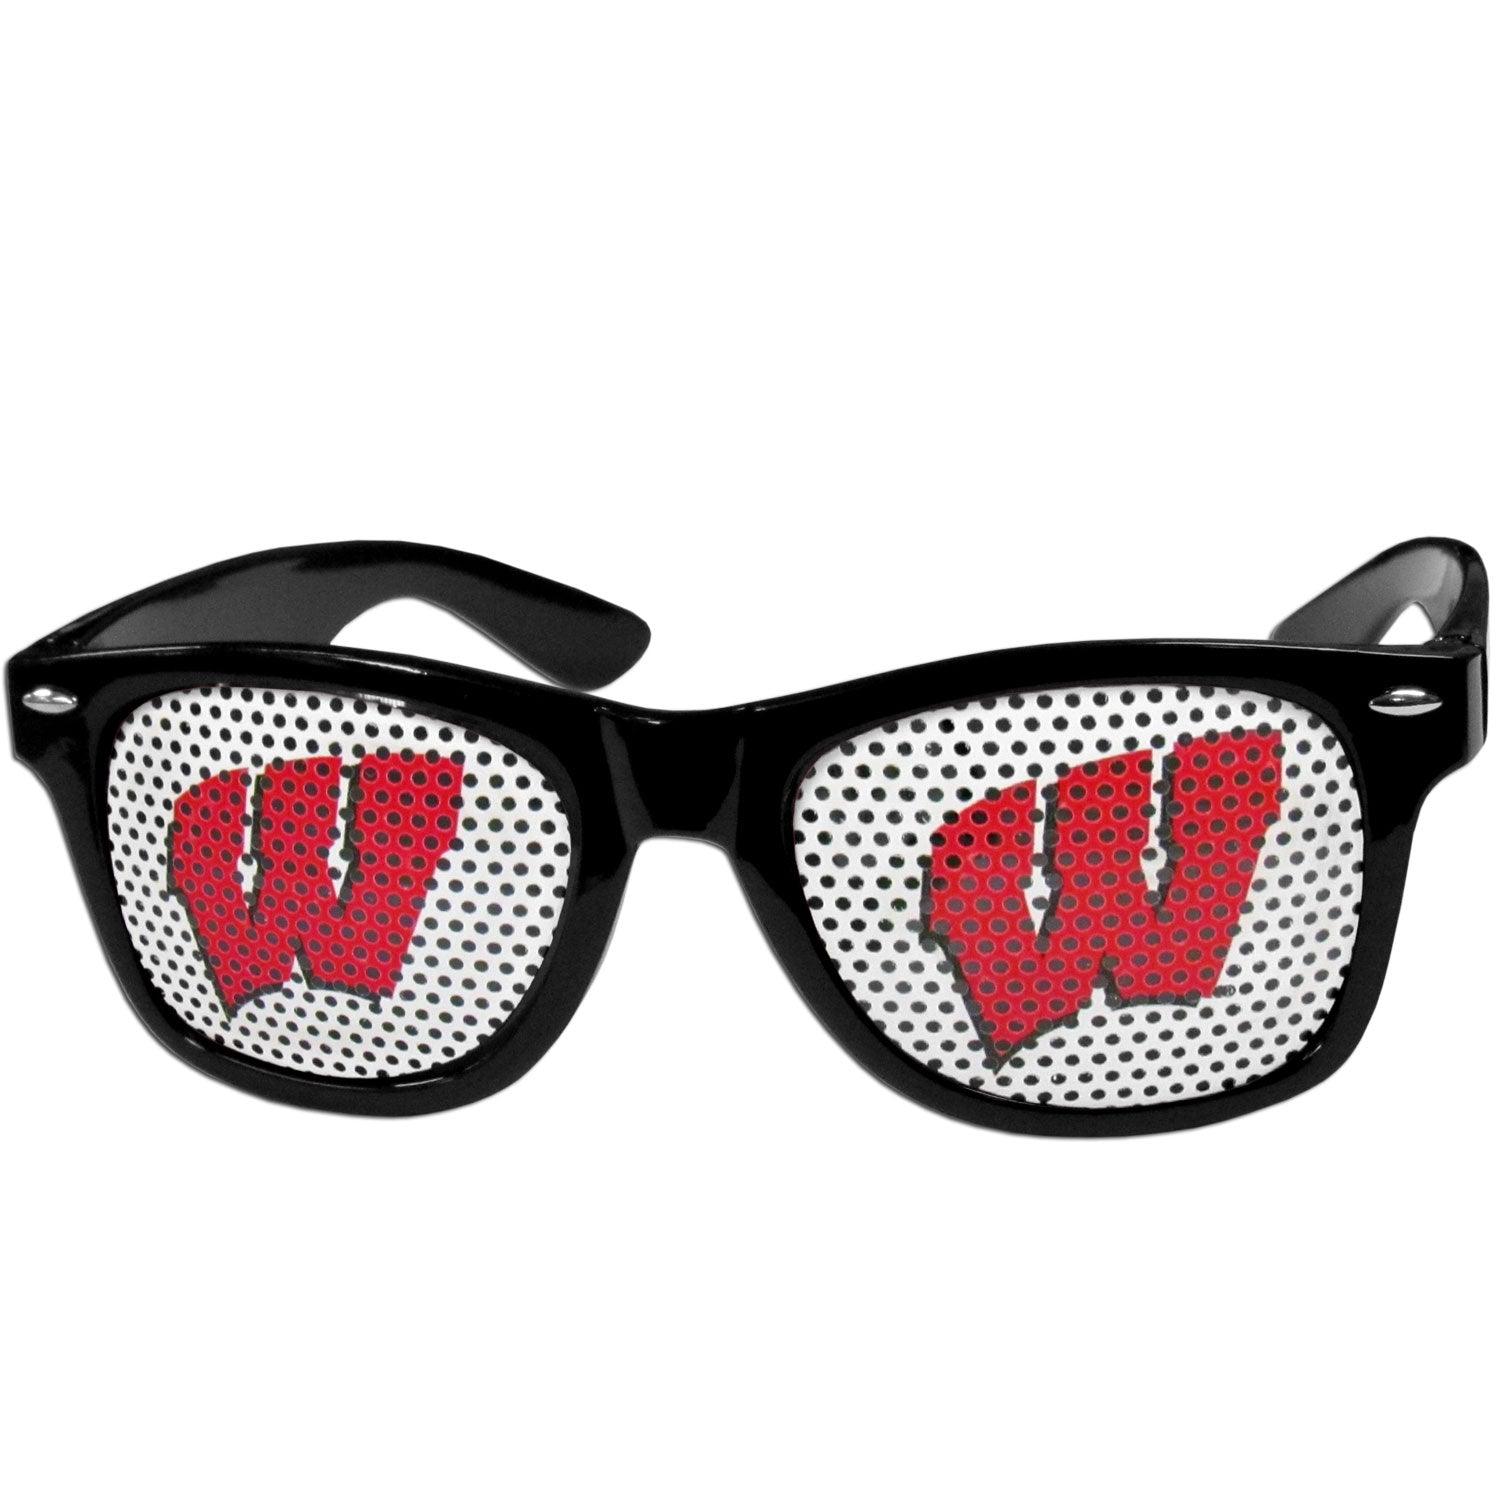 Wisconsin Badgers Game Day Shades - Flyclothing LLC